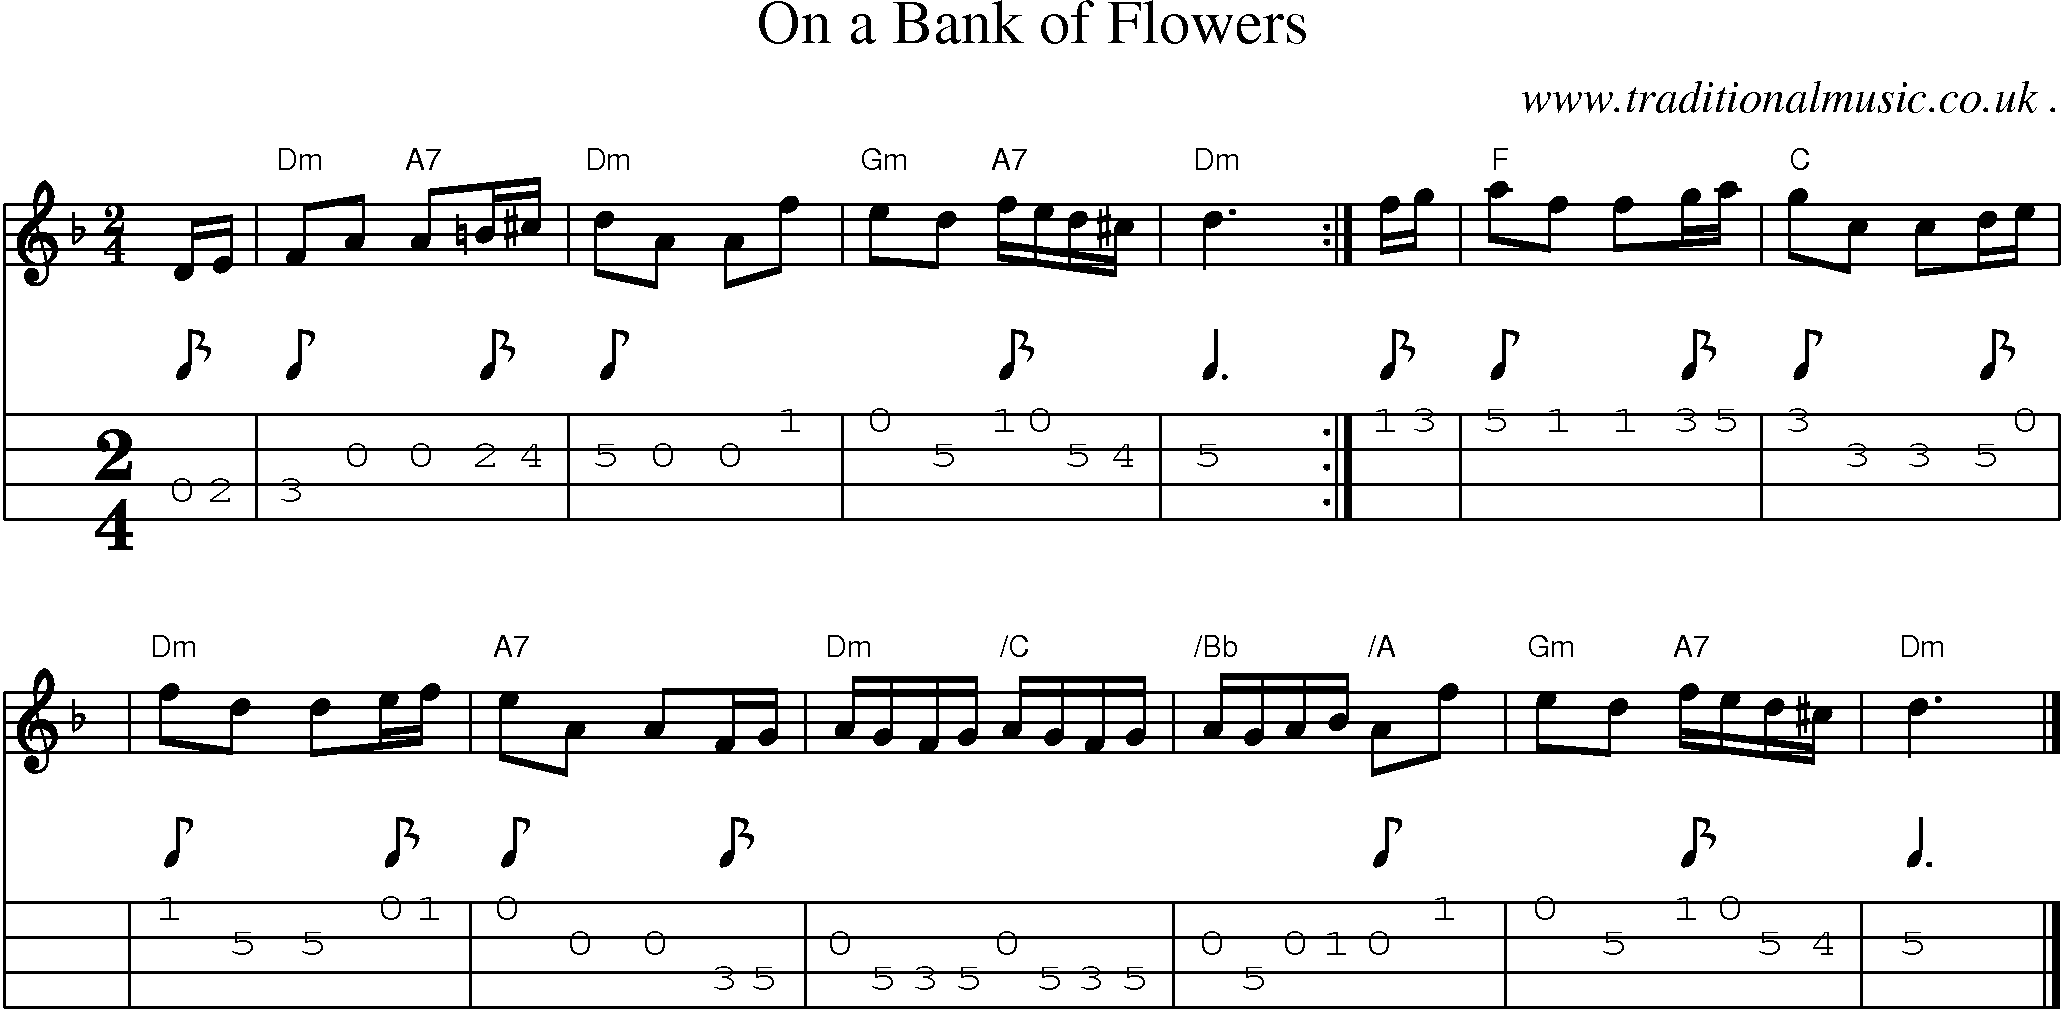 Sheet-music  score, Chords and Mandolin Tabs for On A Bank Of Flowers